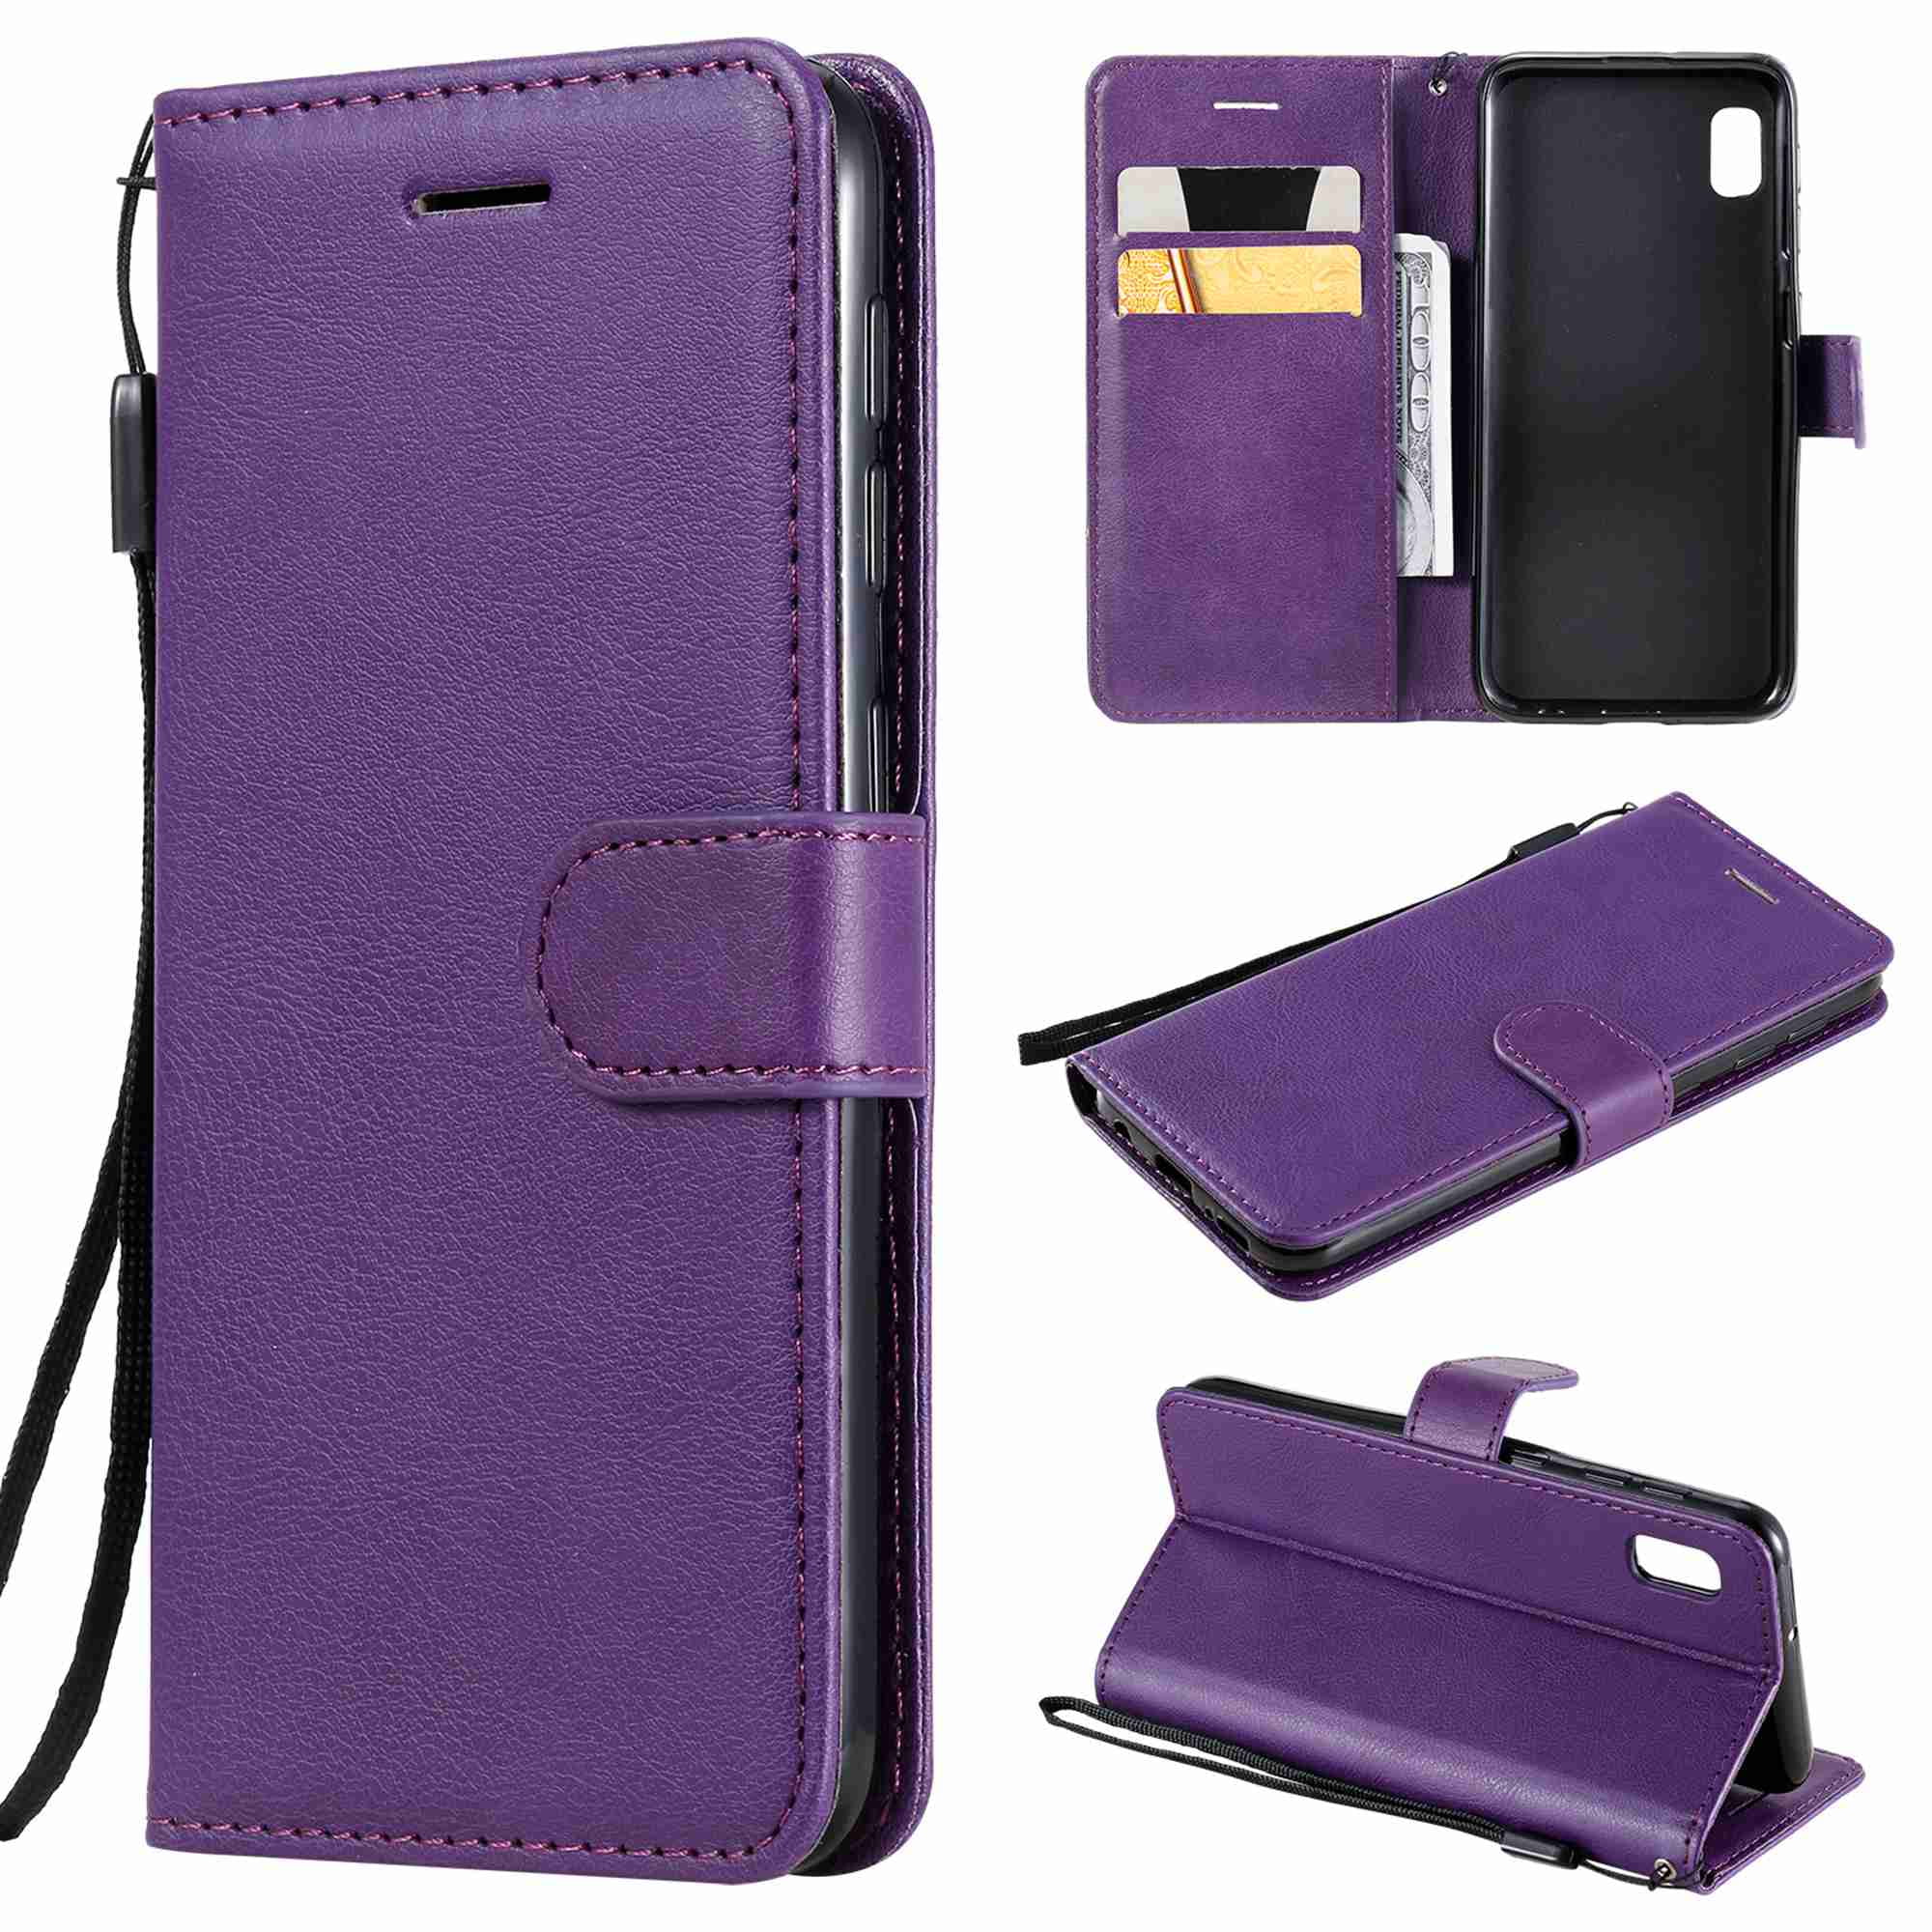 Amaze!uk Leather Phone Case Cover For Samsung Galaxy A10 Flip Protective Wallet Style Open Book Magnetic Stand Samsung A10 Black M10 6.2 Phone Case